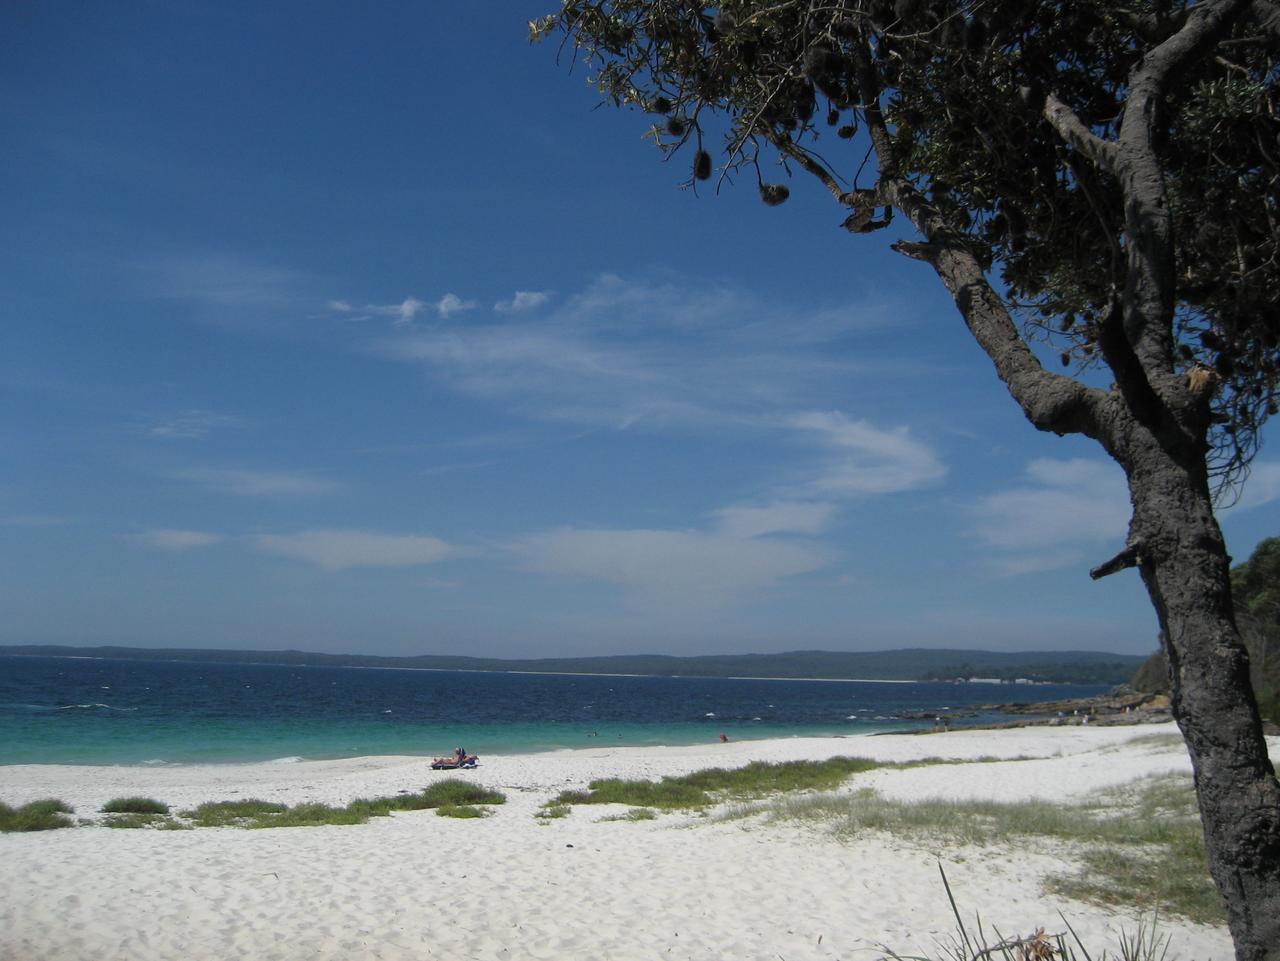 Hyams Beach in Jervis Bay, on the NSW South Coast.